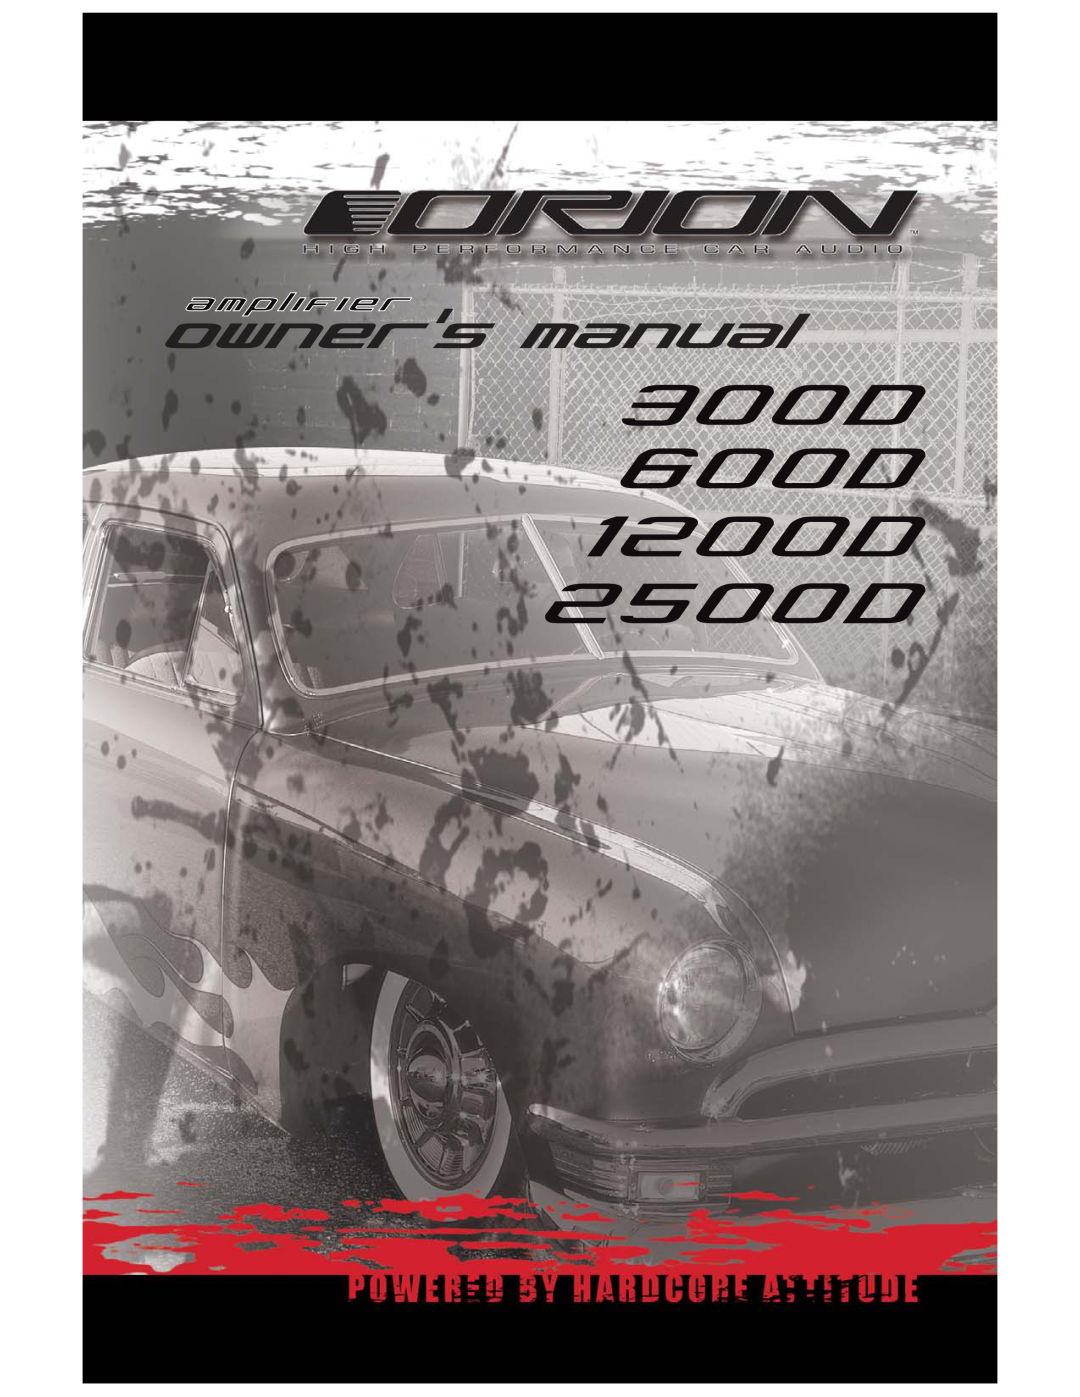 Orion 3000, 6000, 25000, 12000 manual 